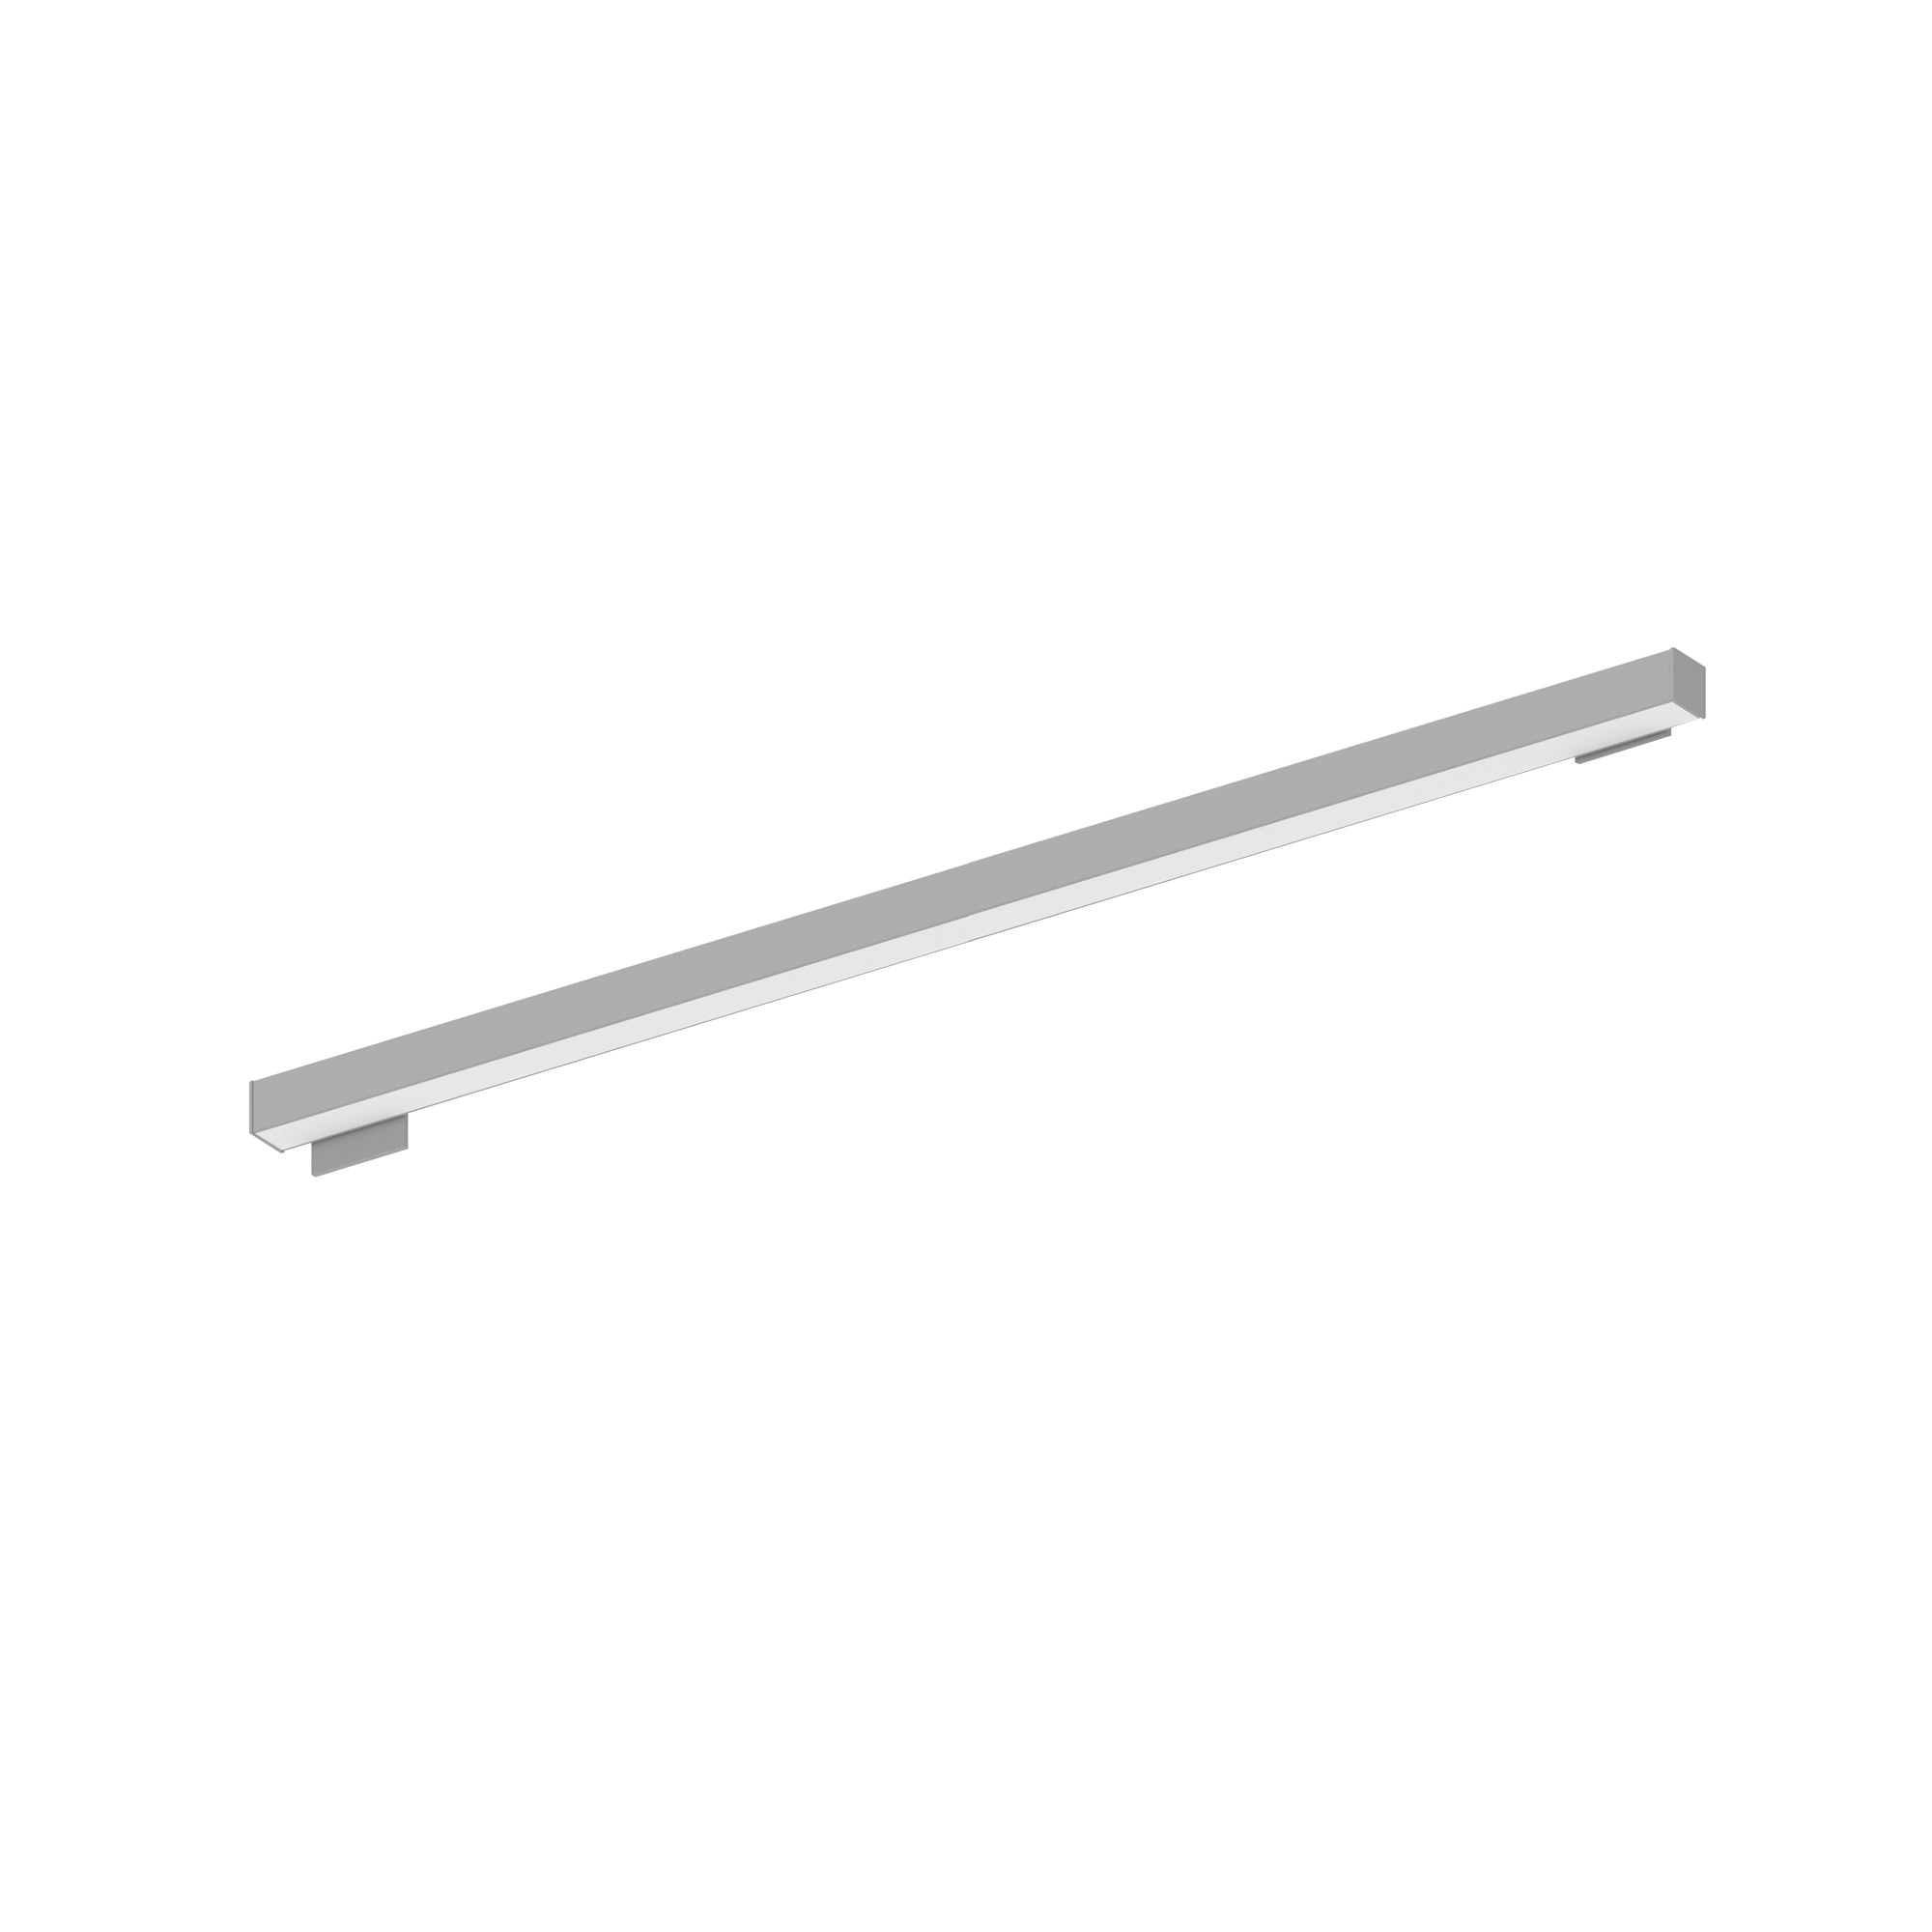 Nora Lighting NWLIN-81030A/L4-R2 - Linear - 8' L-Line LED Wall Mount Linear, 8400lm / 3000K, 4 Inchx4 Inch Left Plate & 2 Inchx4 Inch Right Plate, Aluminum Finish